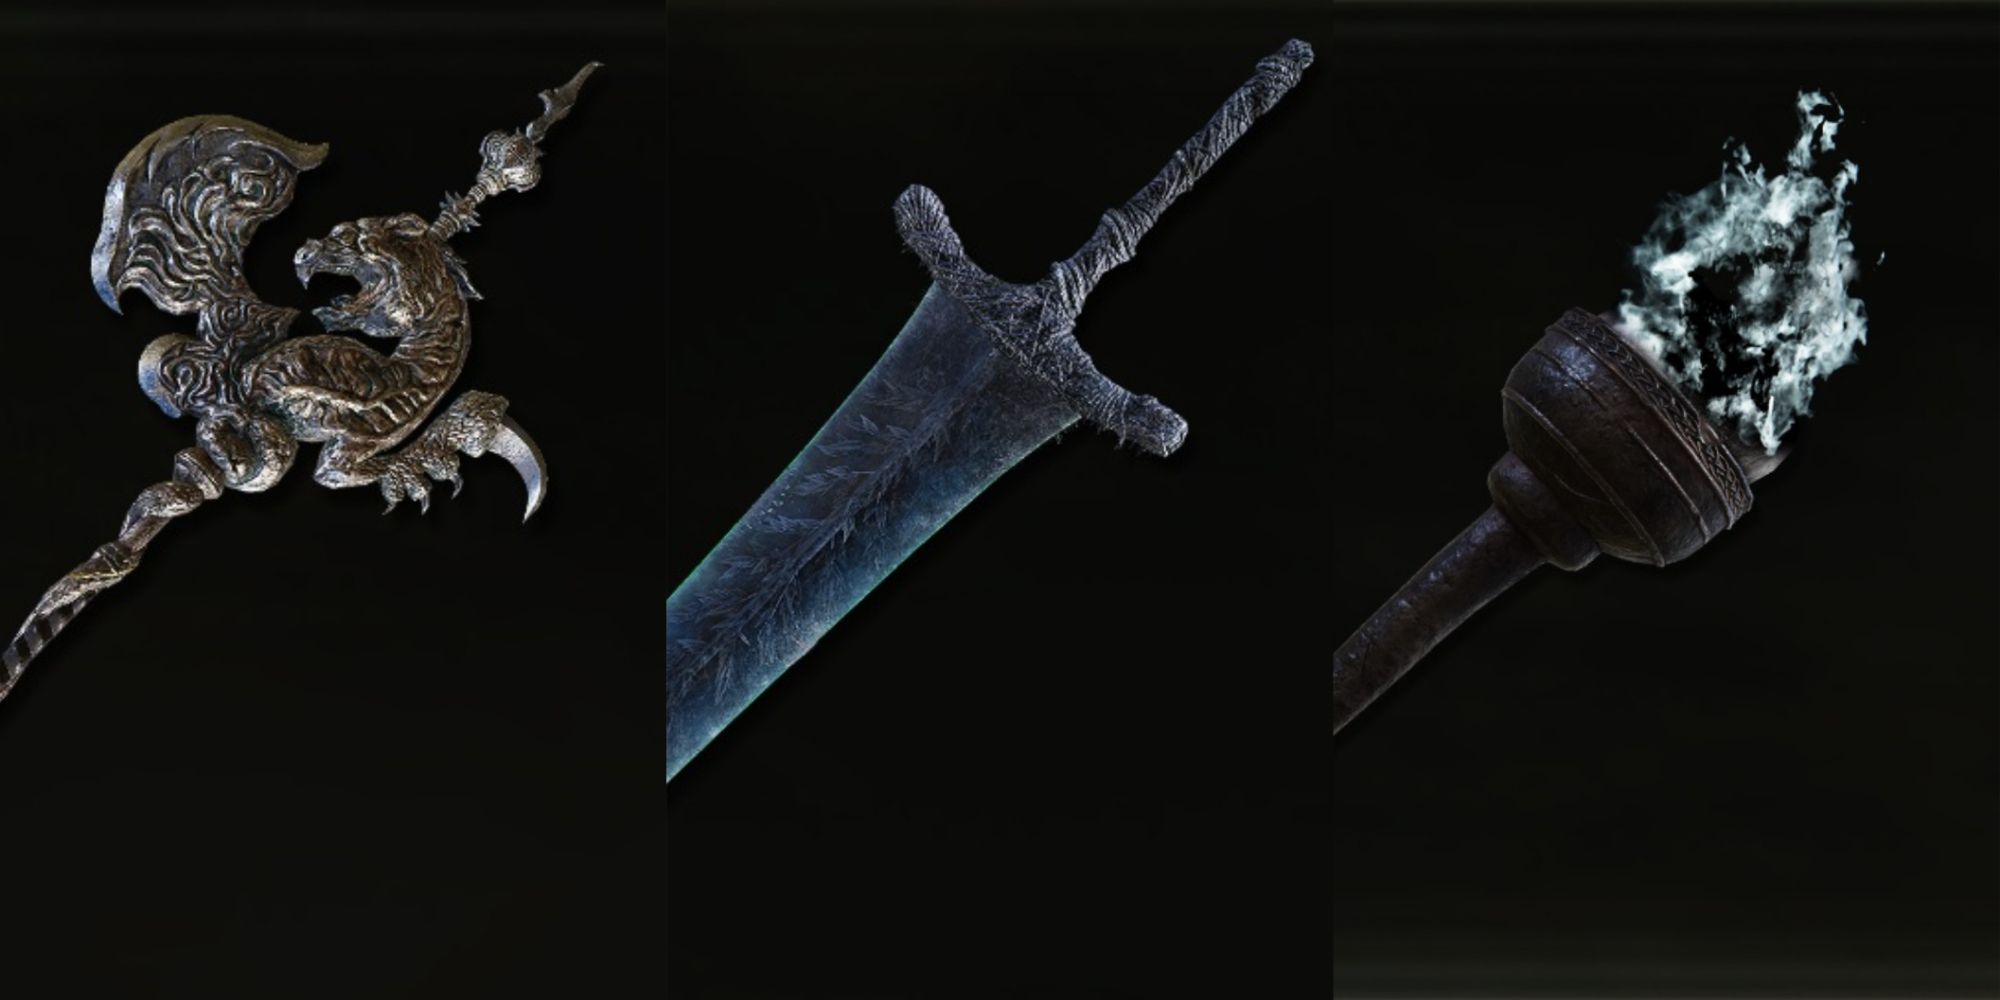 Weapons & Equip - The lightning blade